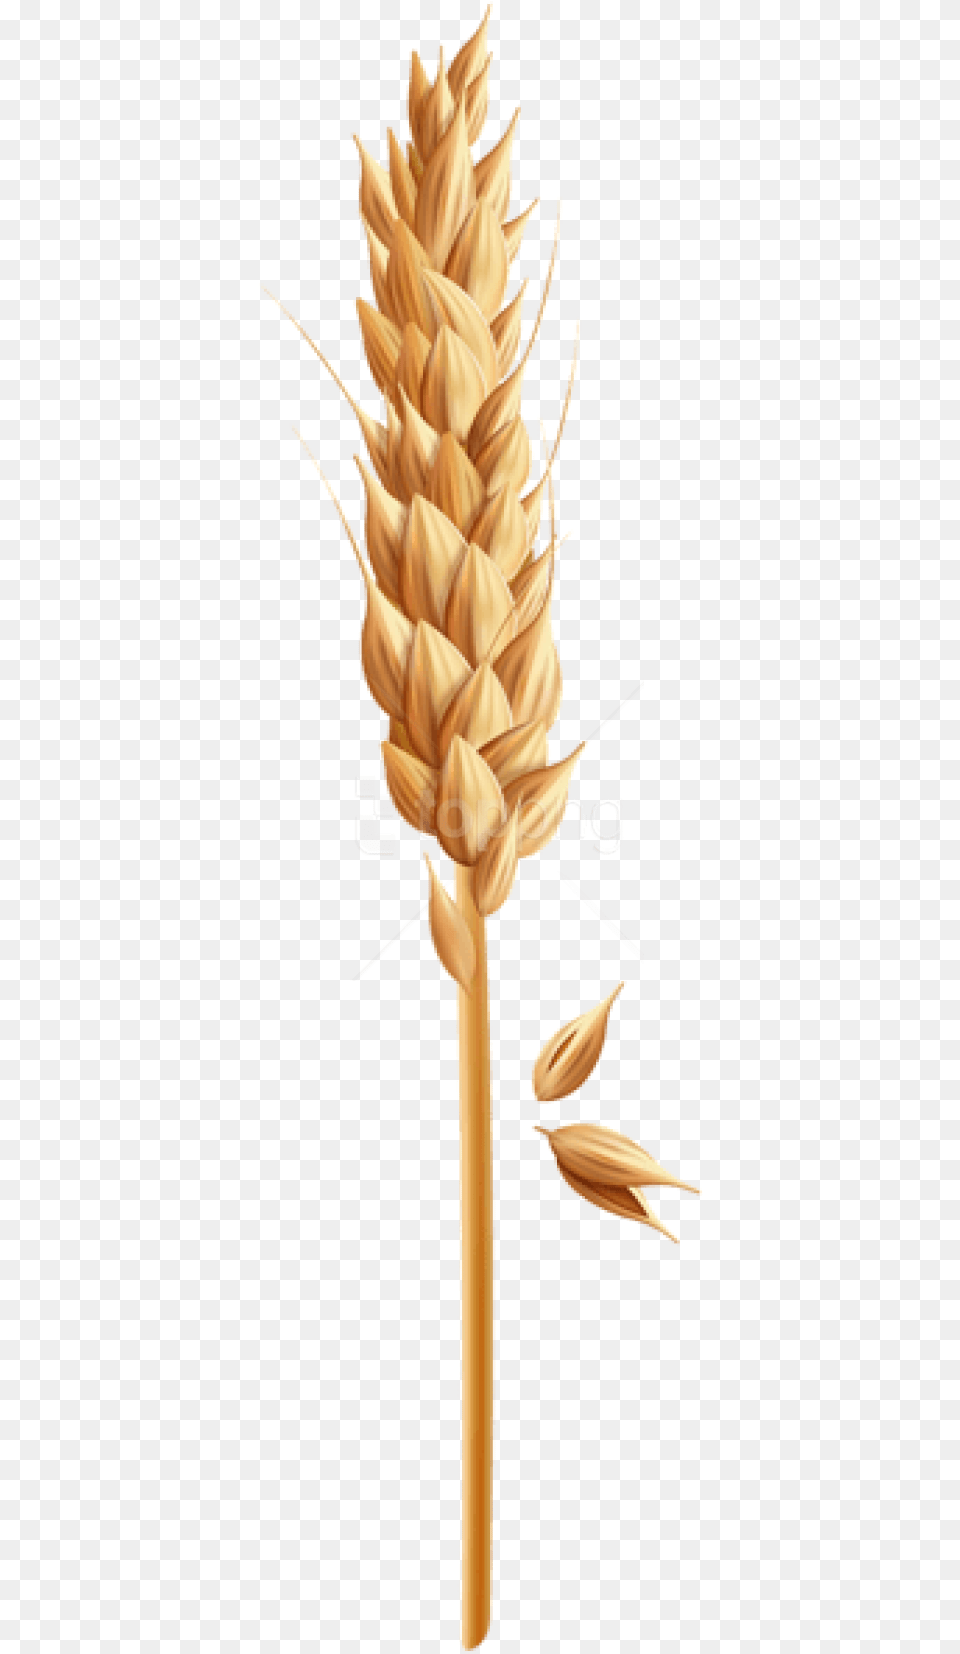 Free Download Wheat Grain Clipart Photo Grain Of Wheat Clipart, Food, Produce, Plant Png Image